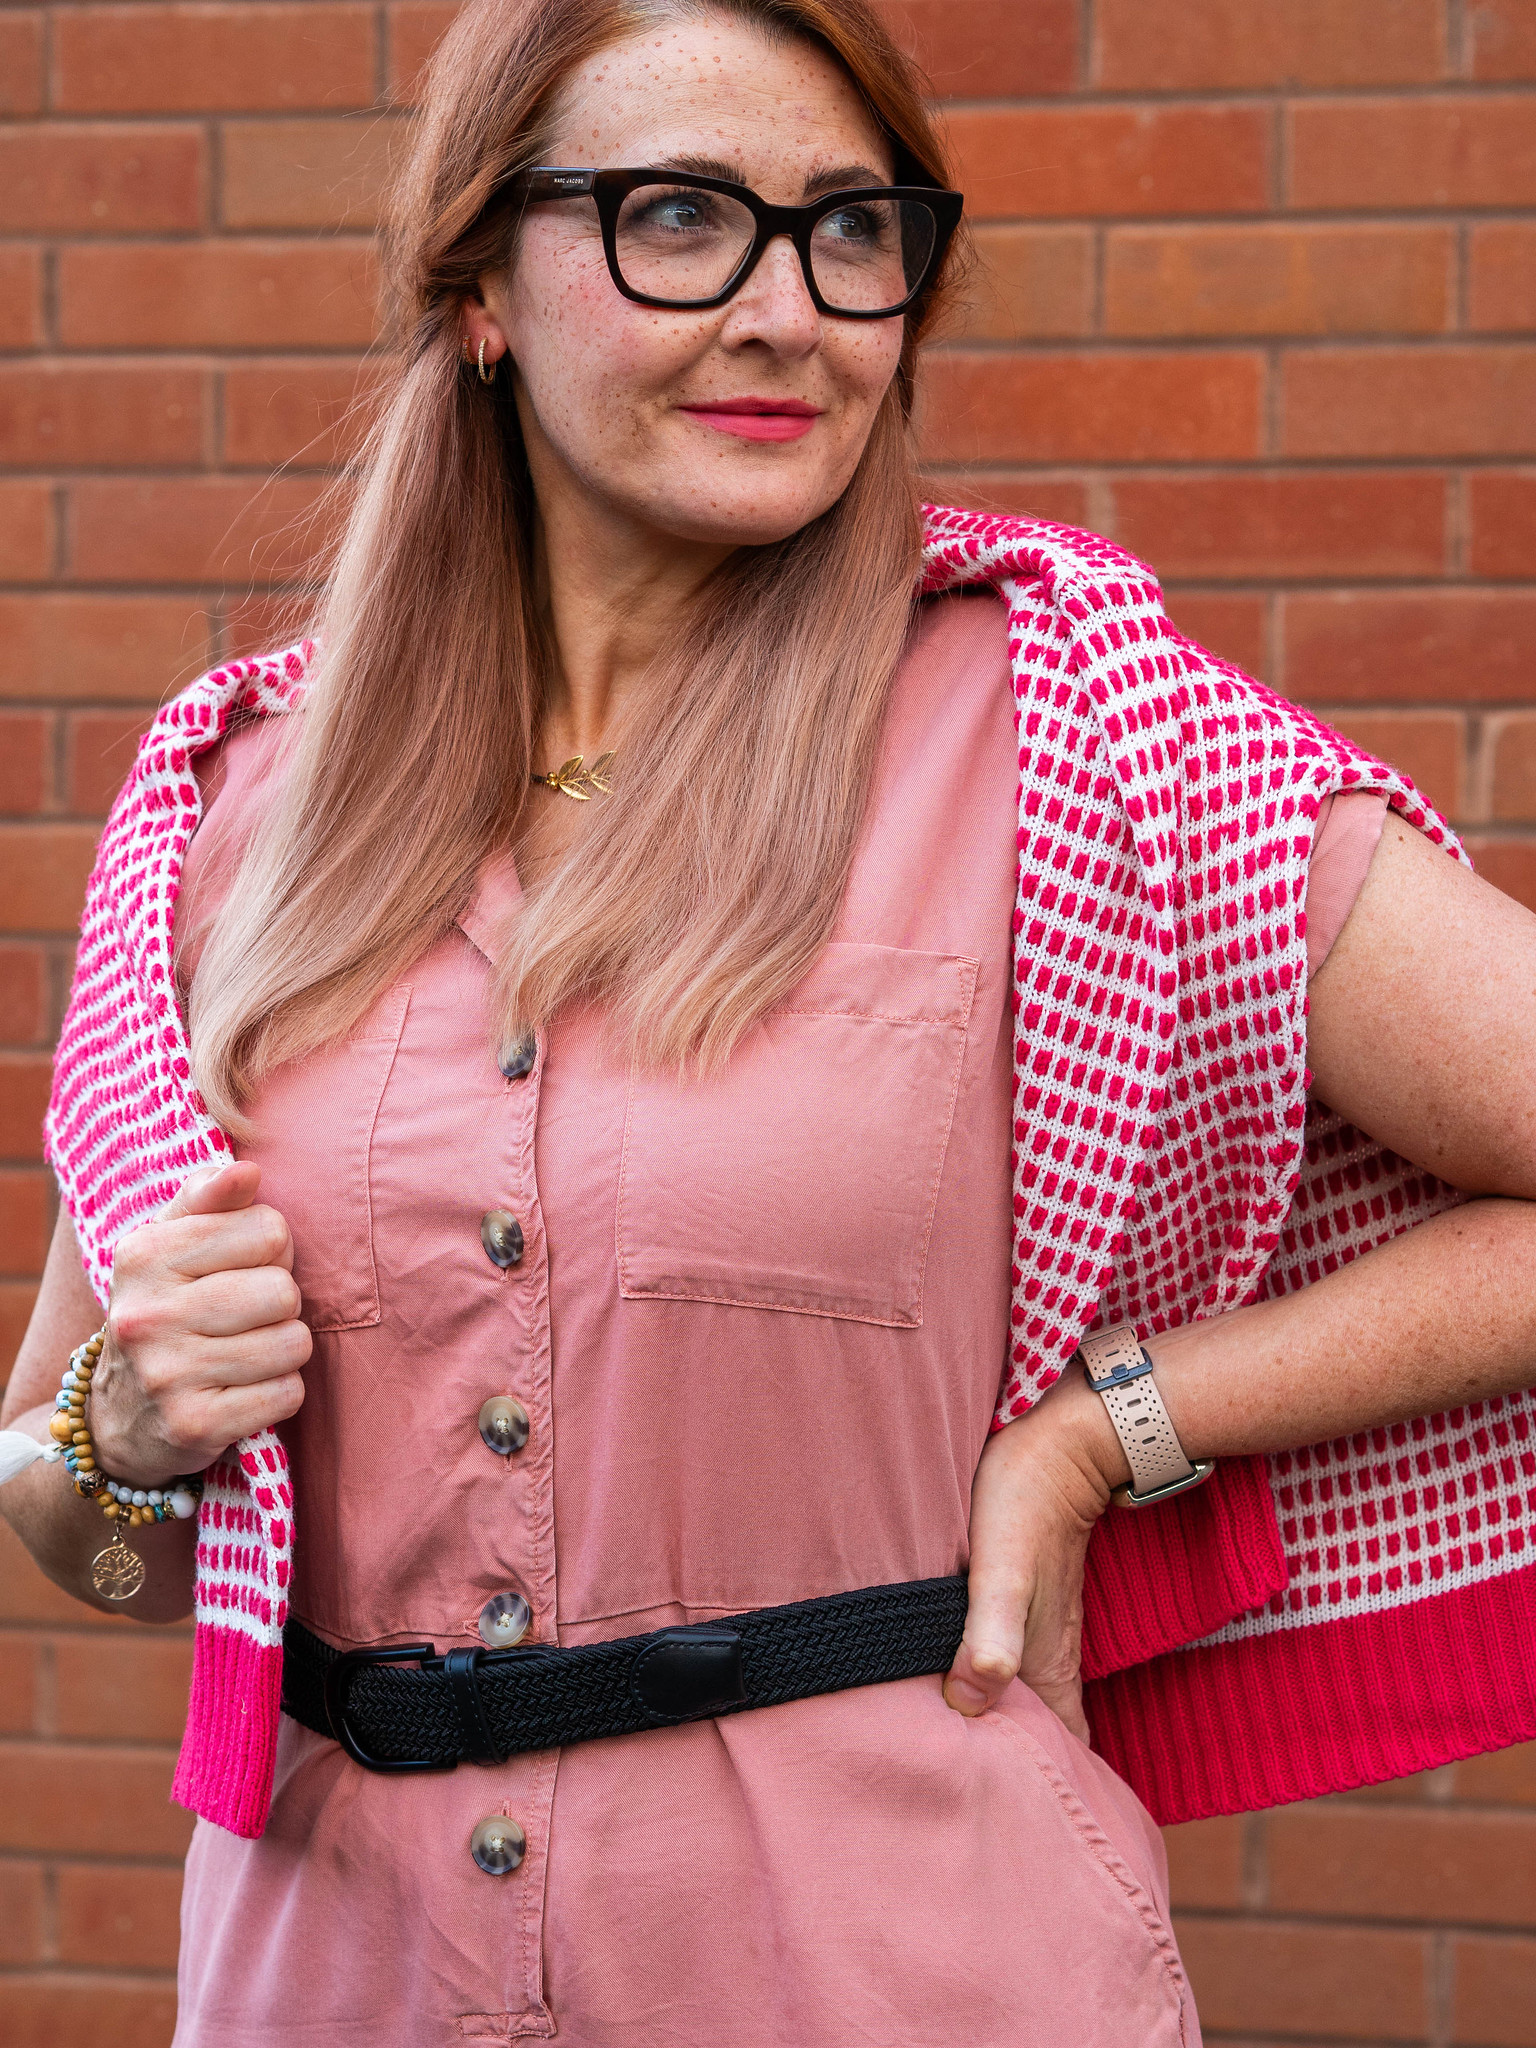 Second Hand September: Things I’ve Worn and Rediscovered (Catherine Summers aka Not Dressed As Lamb in a rose pink jumpsuit, red and white patterned sweater, black belt and flats, and colorful striped shopping bag)